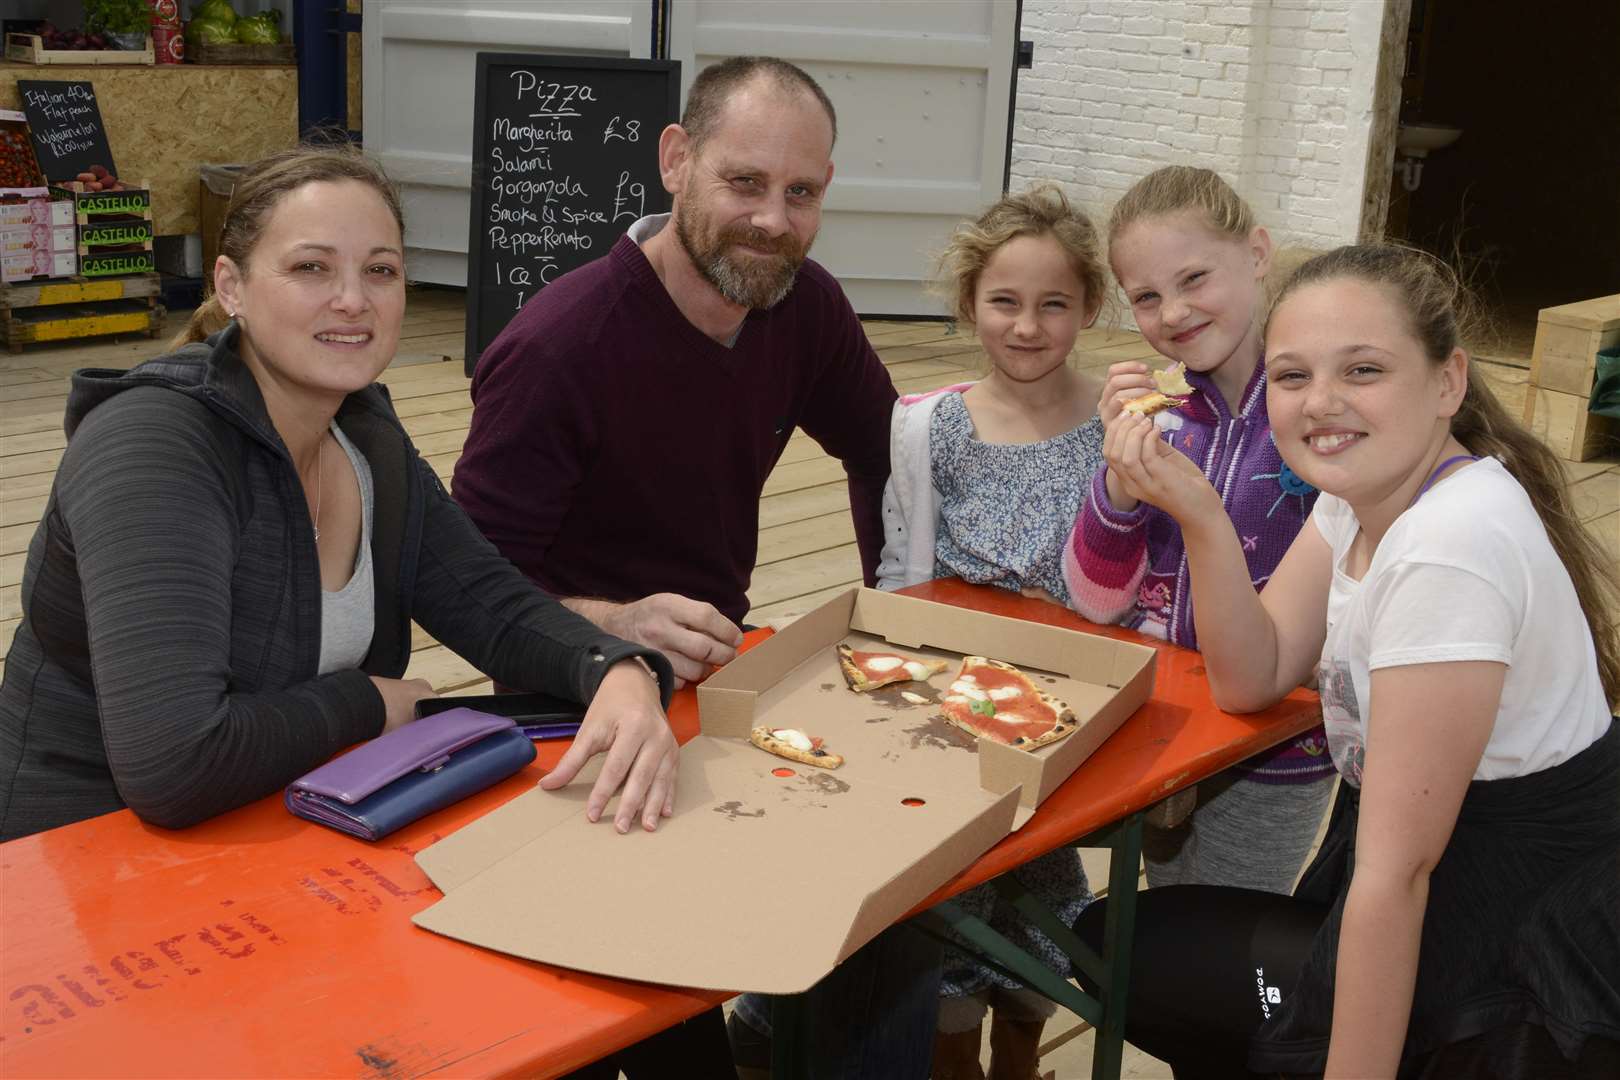 Nicola and Simon Maynard enjoyed their pizza with their children Isabelle, Sophie and Emily. Picture: Paul Amos. (15071195)